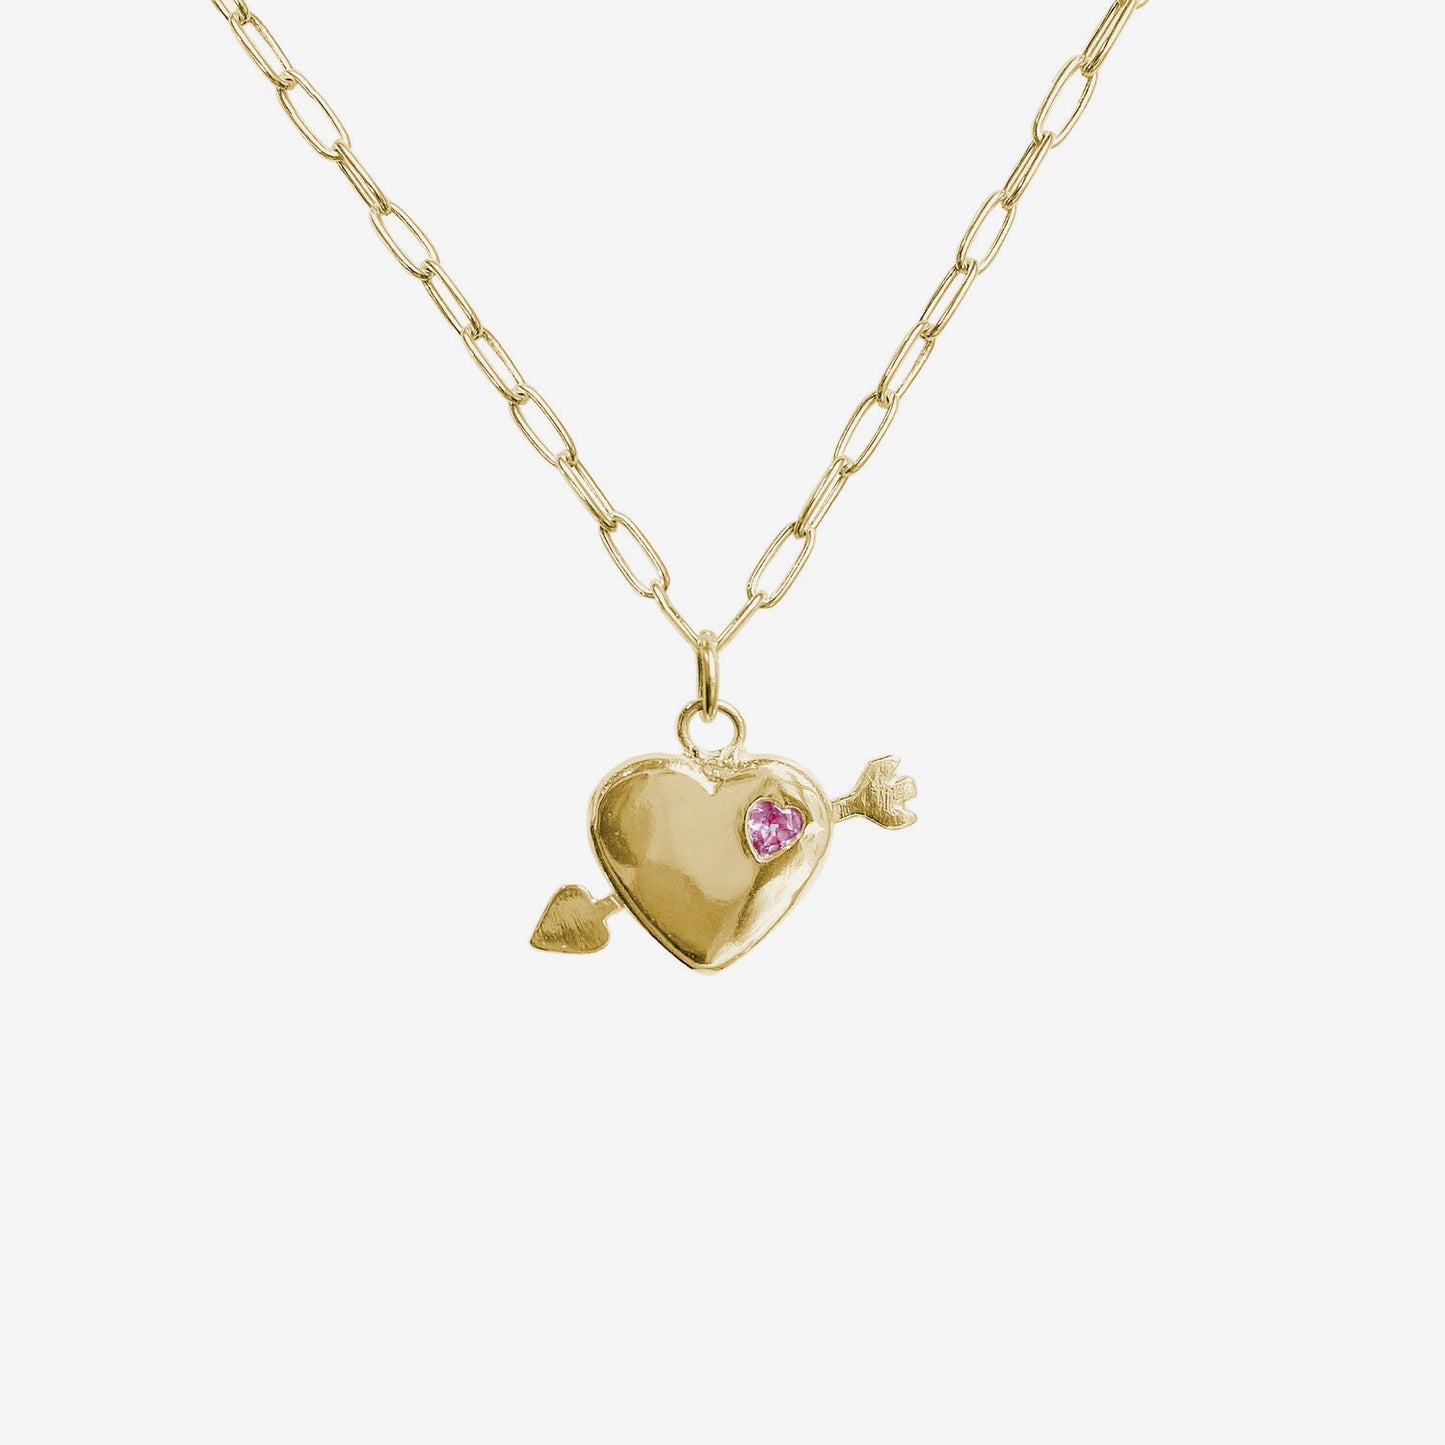 OK Cupid Necklace - Gold